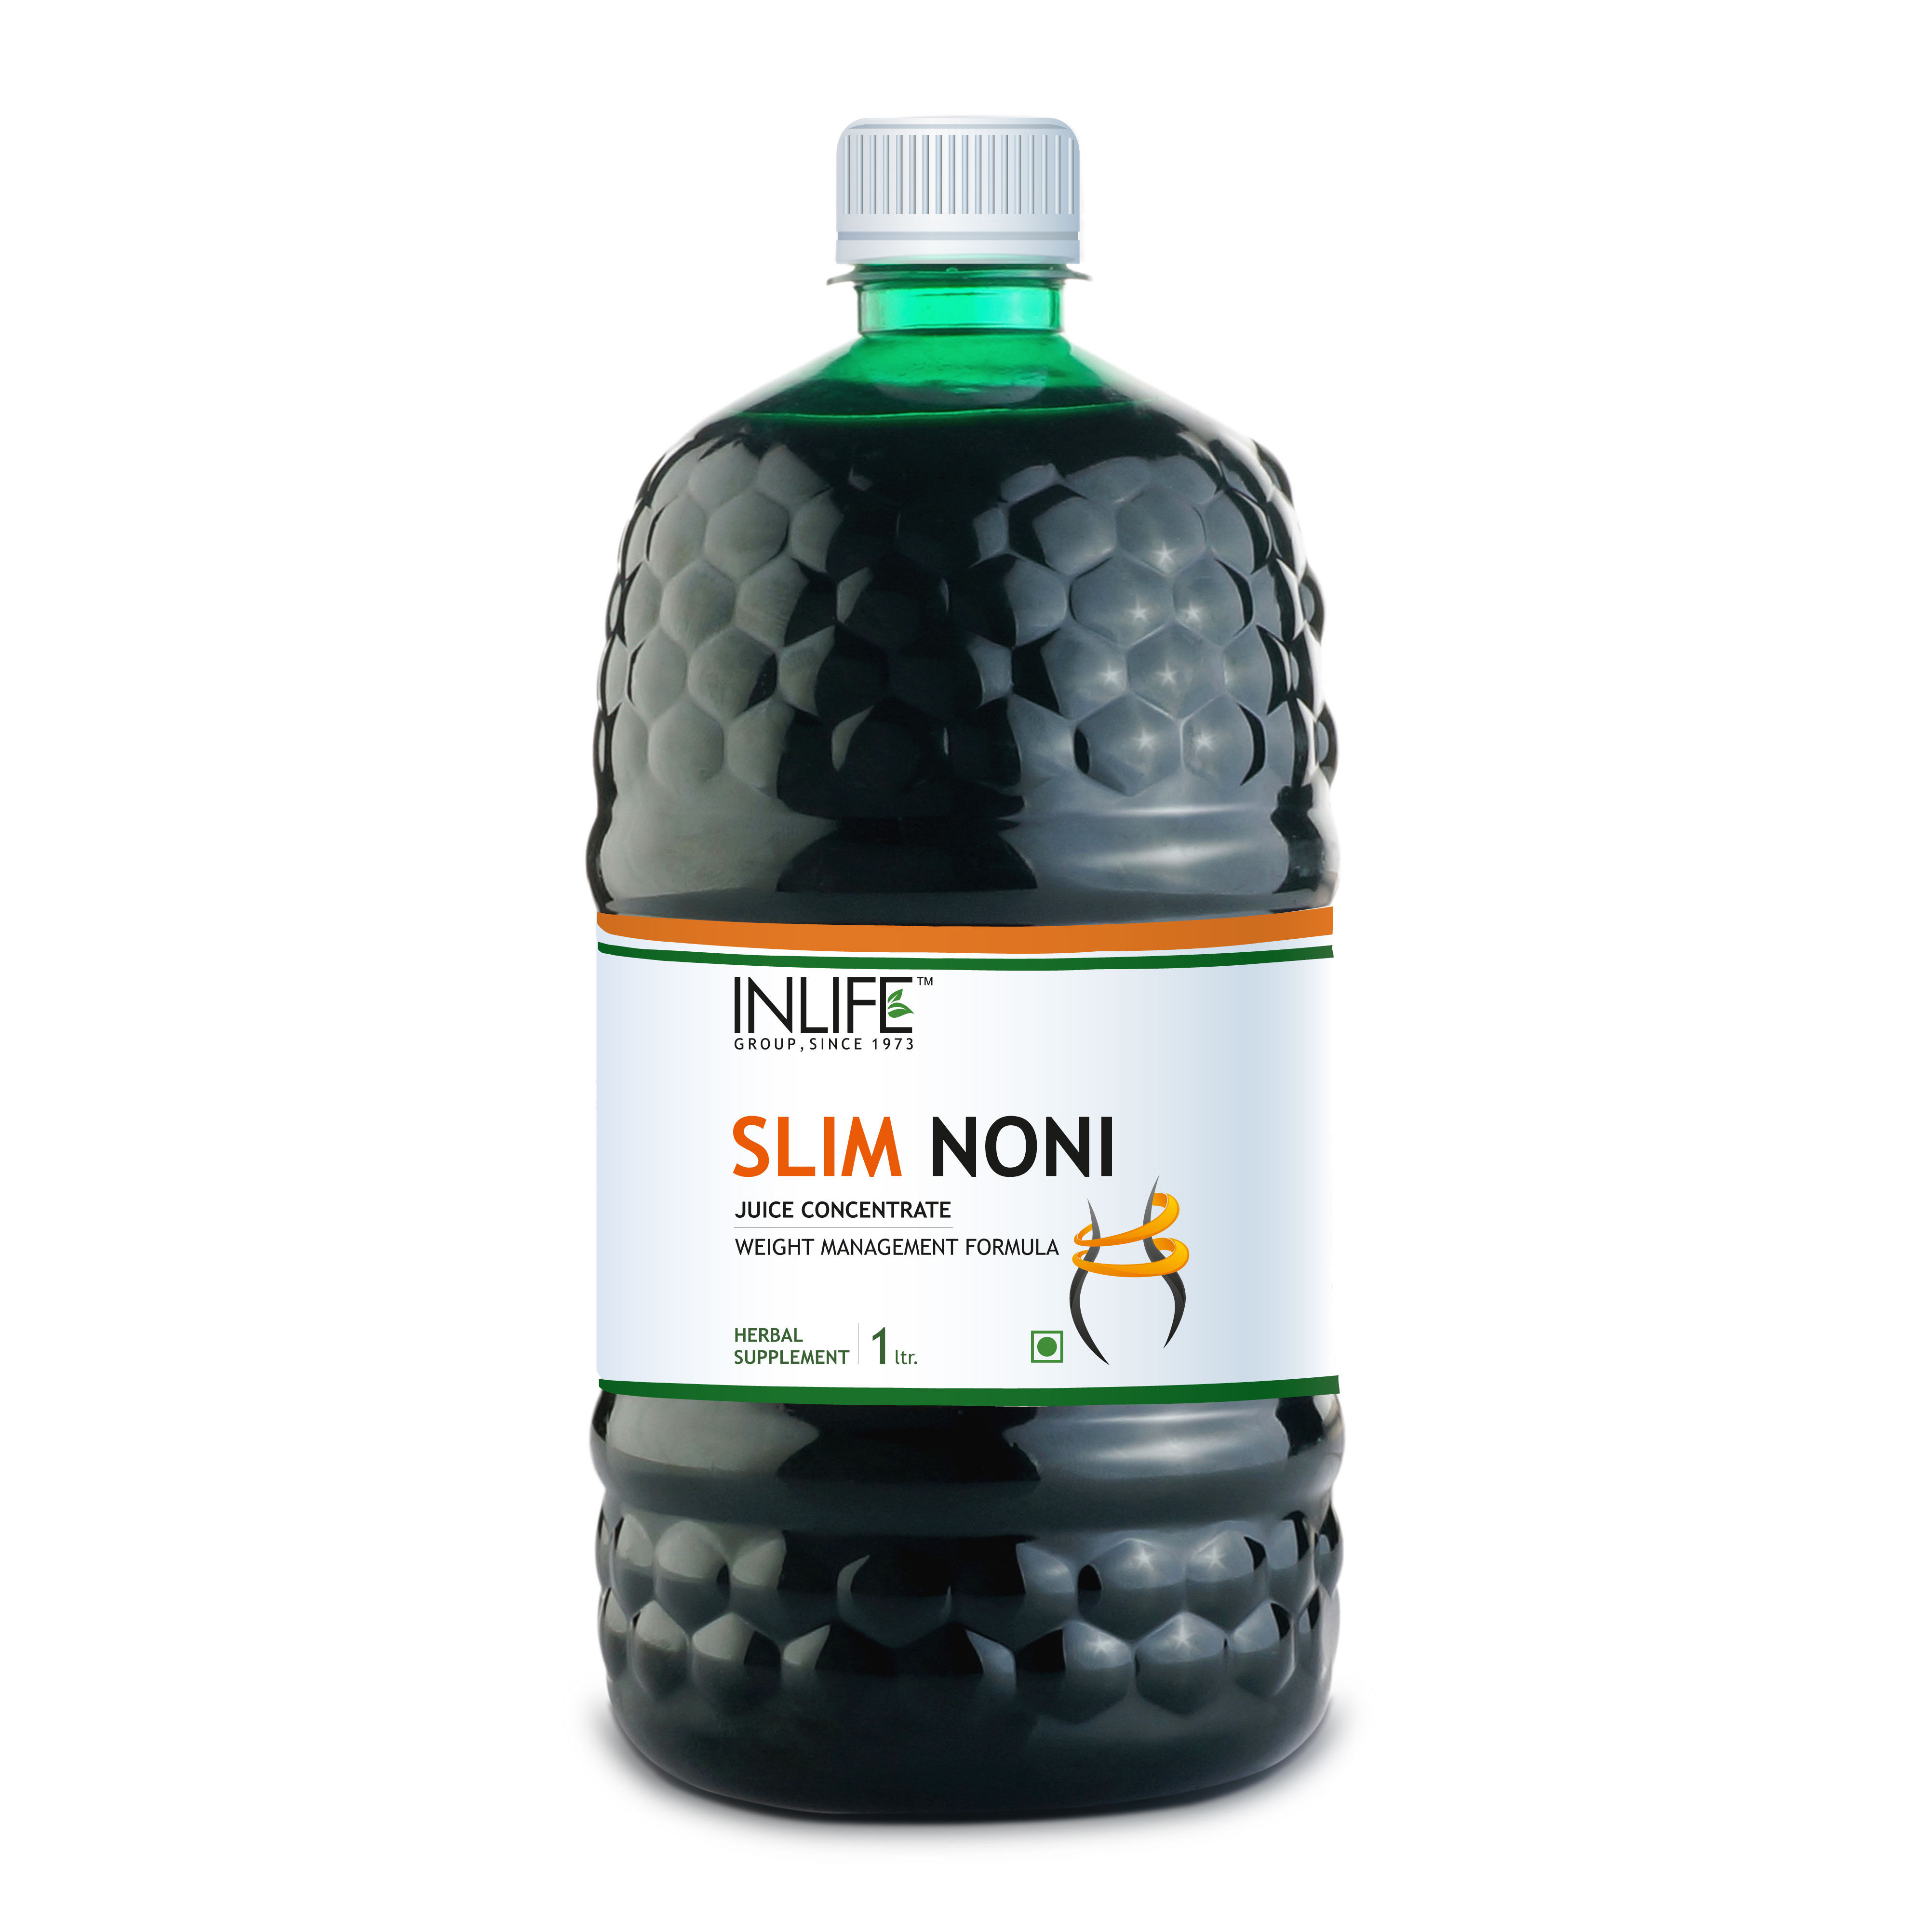 INLIFE Slim Noni Juice Concentrate Weight Management Formula - 1 Litre